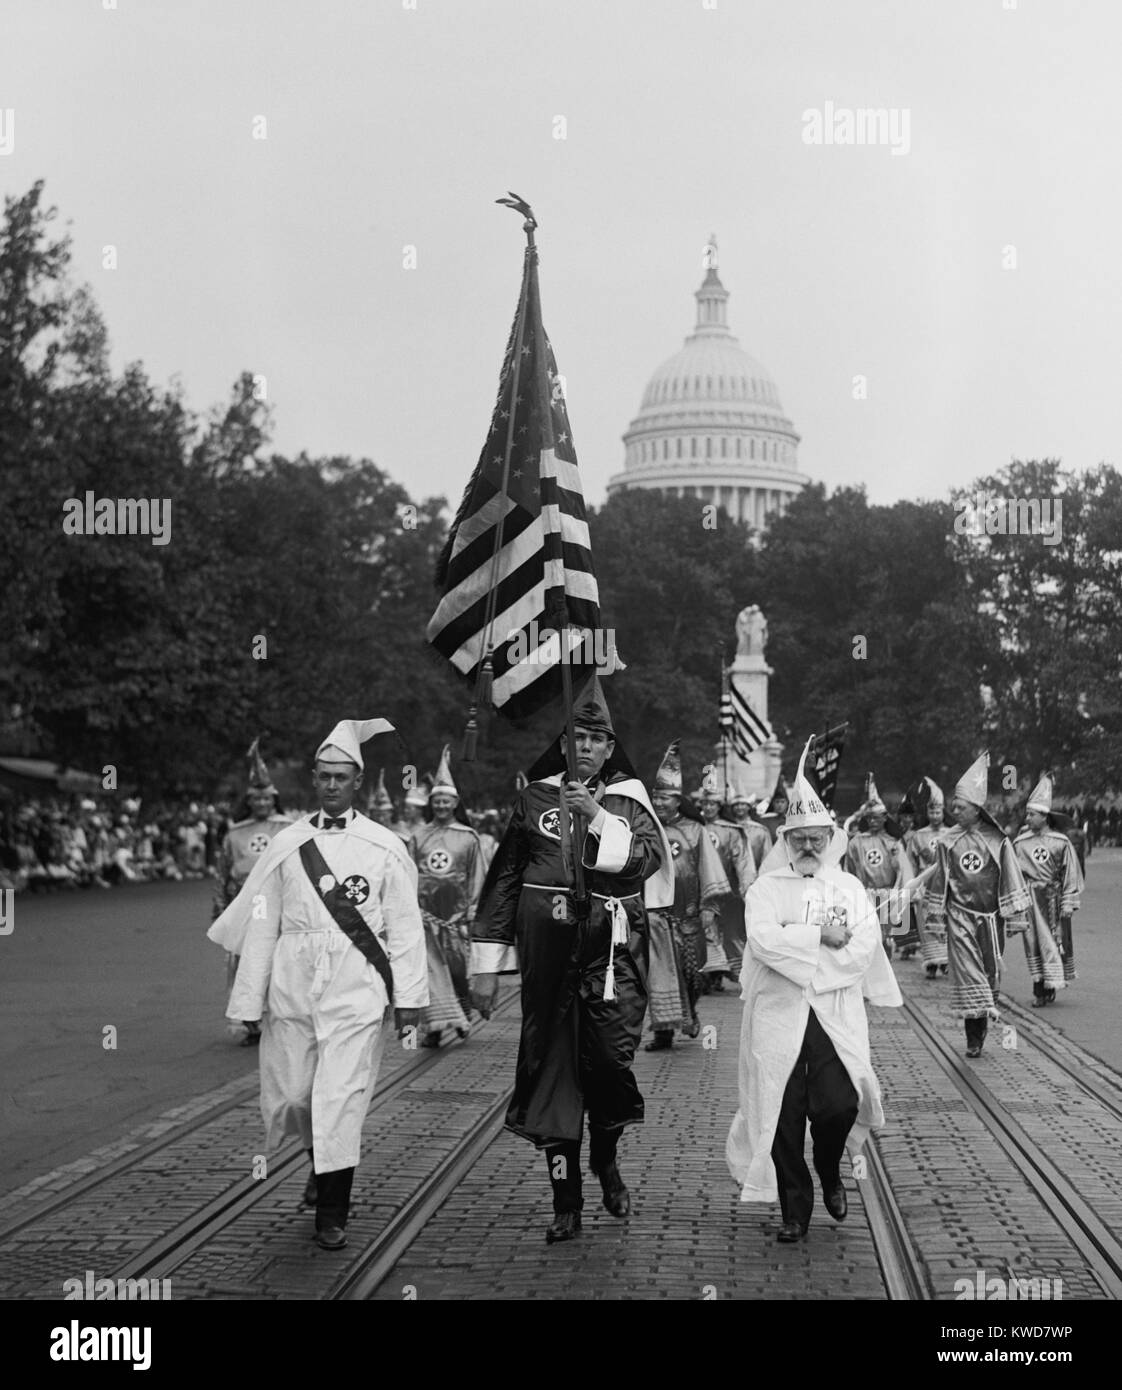 Ku Klux Klansmen on parade on Pennsylvania Avenue with the Capitol in the background. Washington, D.C. Sept. 13, 1926. (BSLOC 2015 16 184) Stock Photo